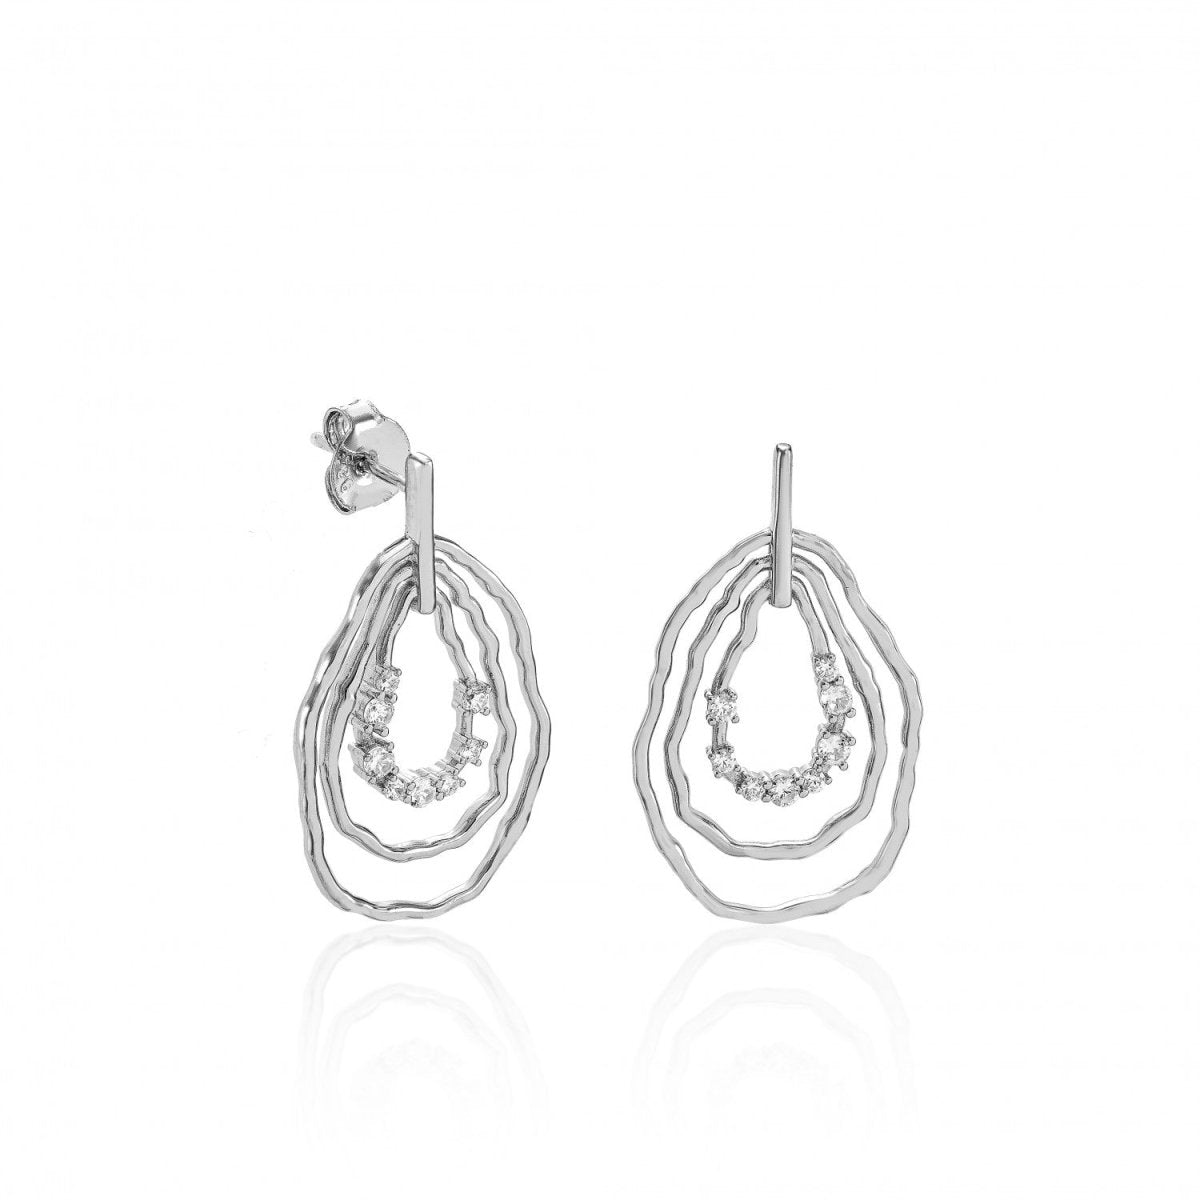 Earrings - Earrings with oval-shaped pendants and zirconia sparkles